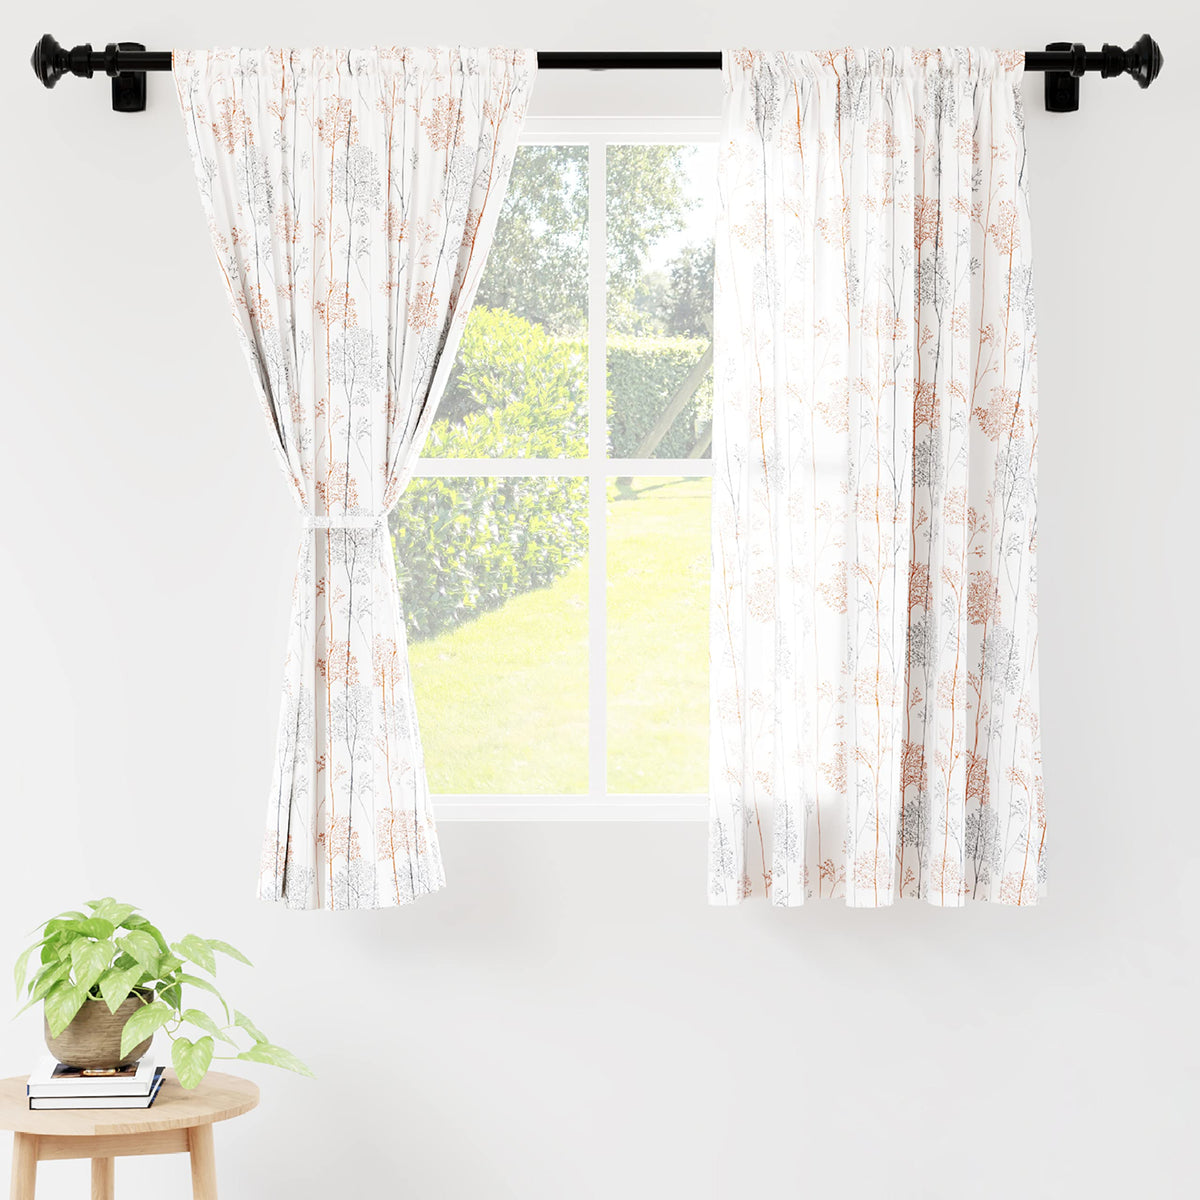 Encasa Homes Polyester Printed Window Curtain for 5 ft with Tie Back, Rod Pocket, Light-Filtering, Curtains for Kitchen, Bedroom, Living Room (142x150 cm), Oranges Branches, Set of 2